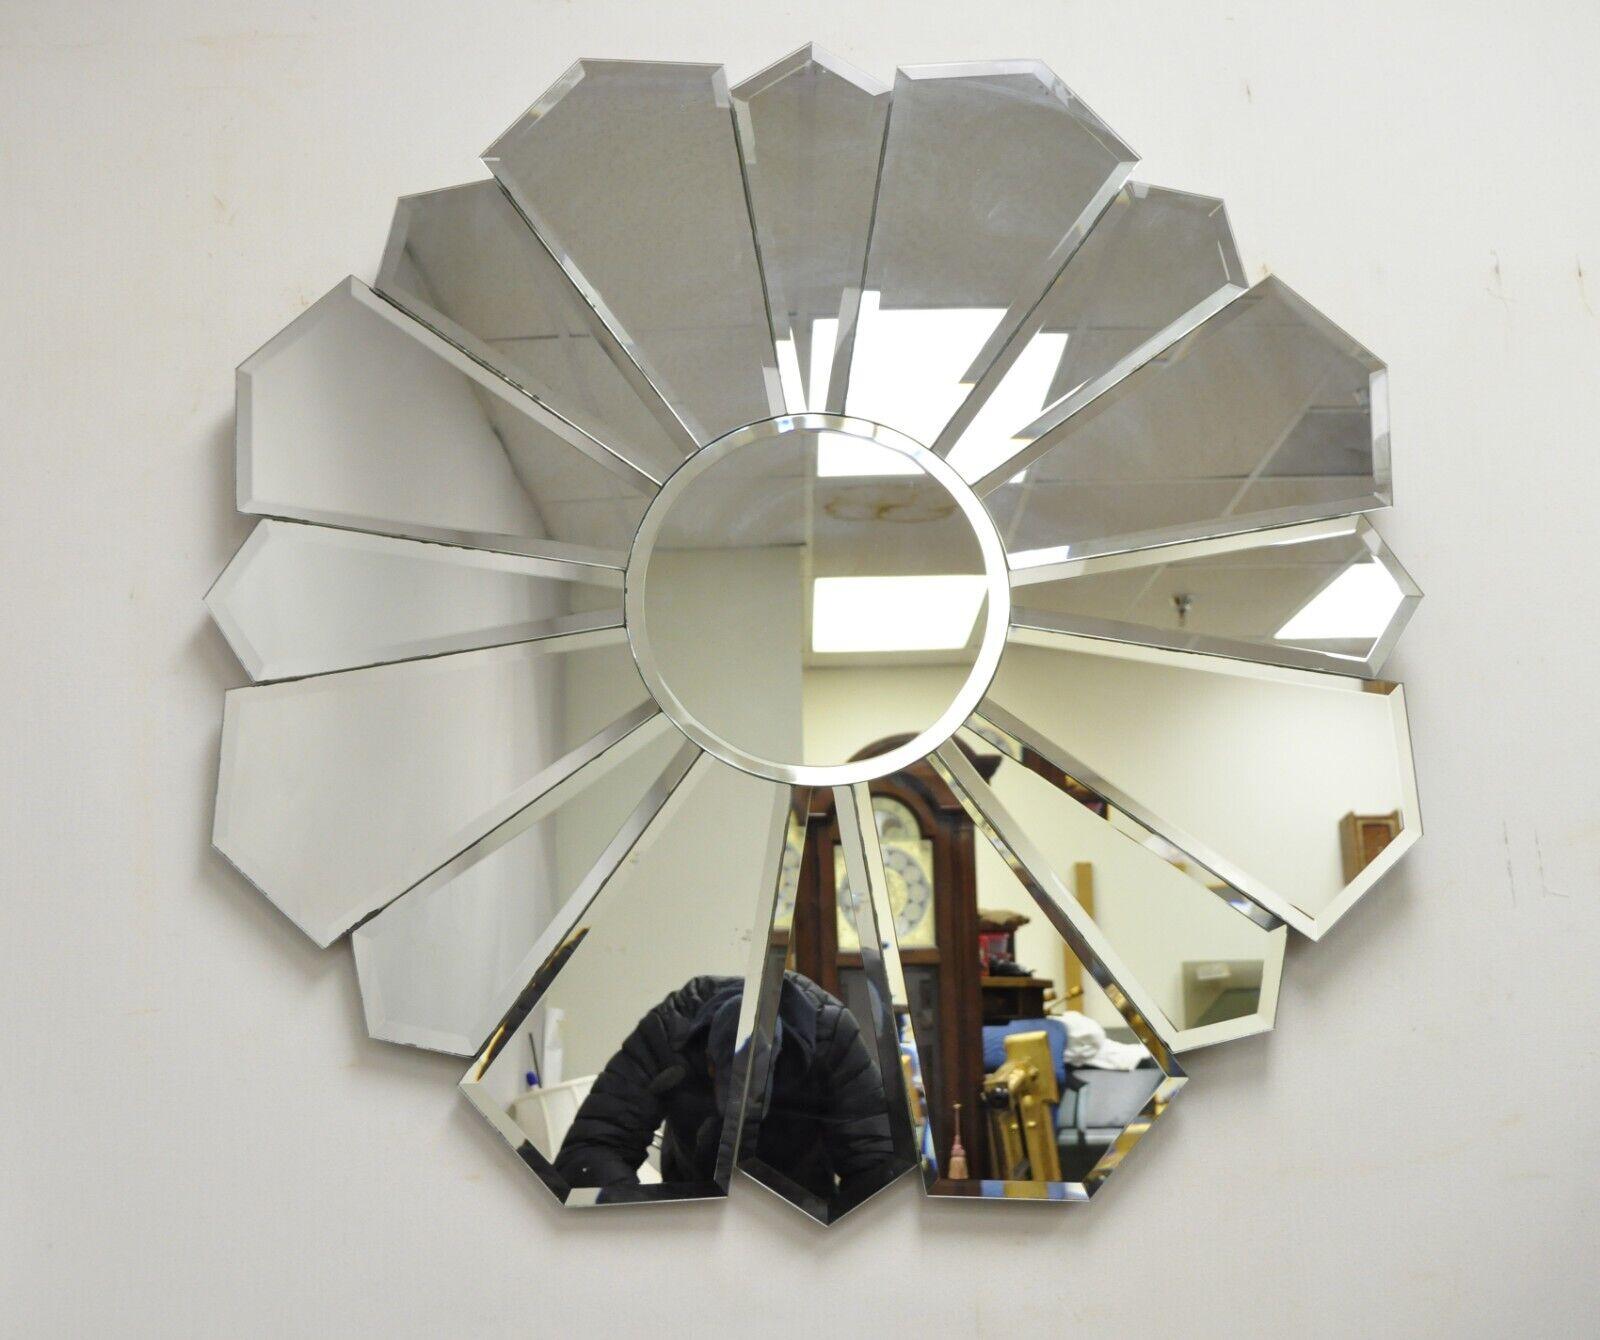 Vintage Hollywood Regency beveled glass sunburst flower petal wall mirror. Item features a unique sunburst/flower petal design, clear beveled glass panels, very nice item, great style and form. Circa late 20th century. Measurements: 38.5